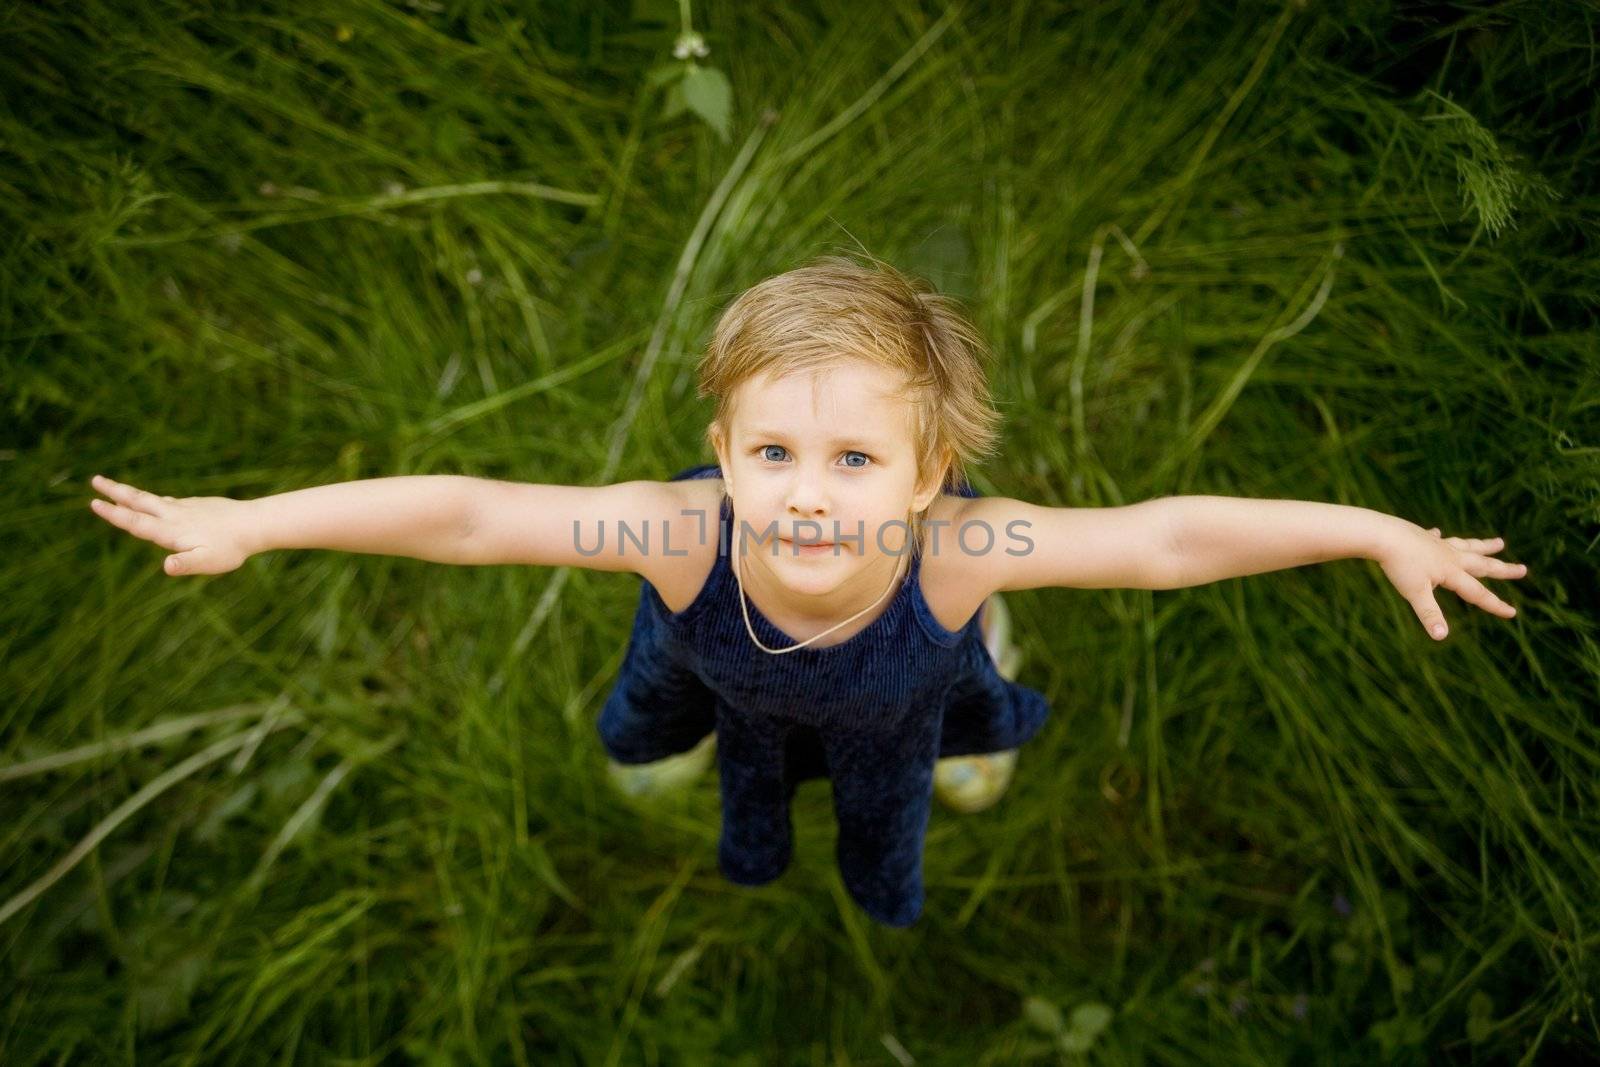 The girl looking upwards and standing on a grass
